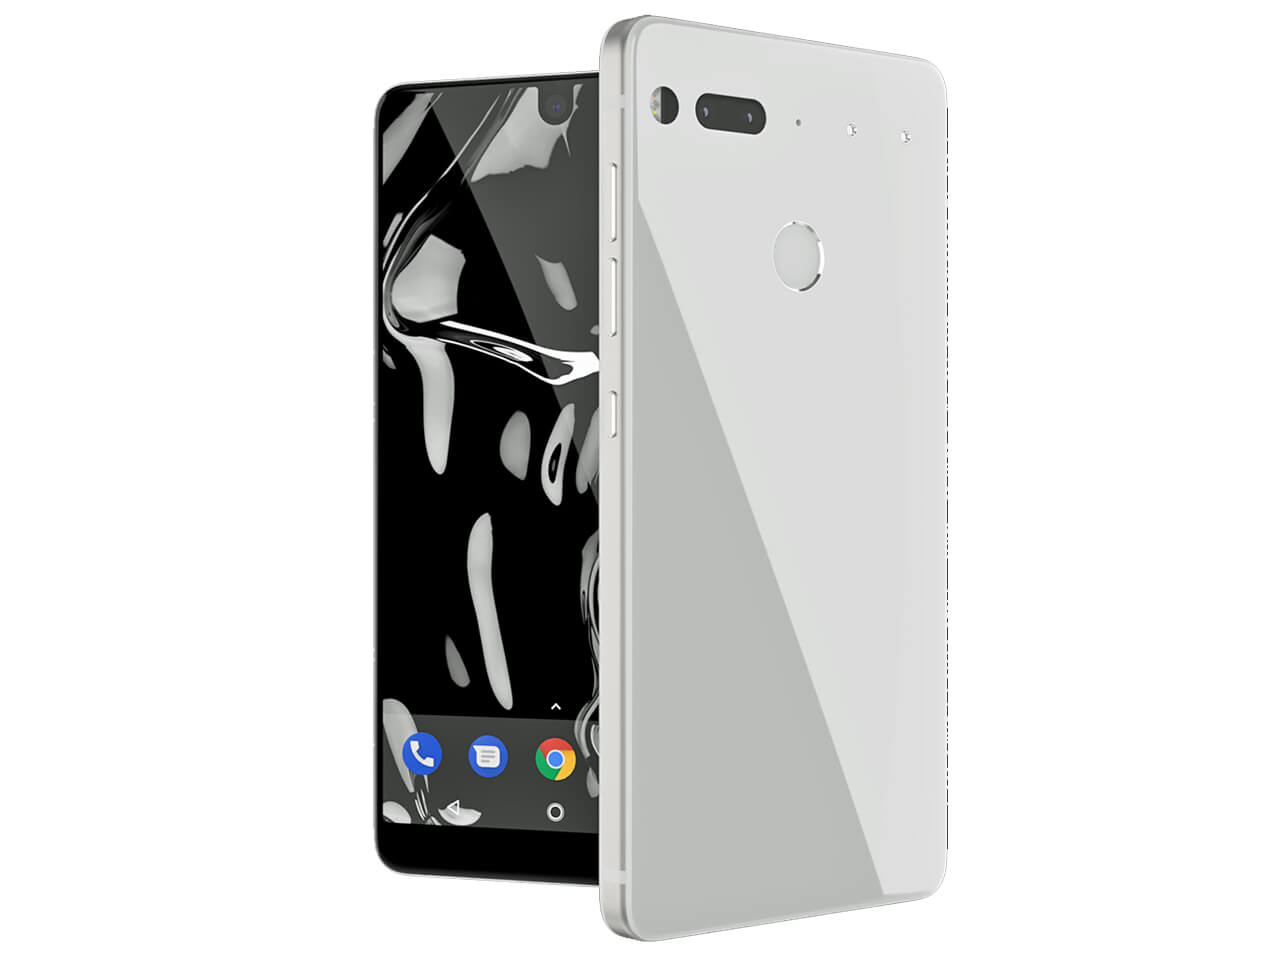 Essential PH-1 Android Smartphone